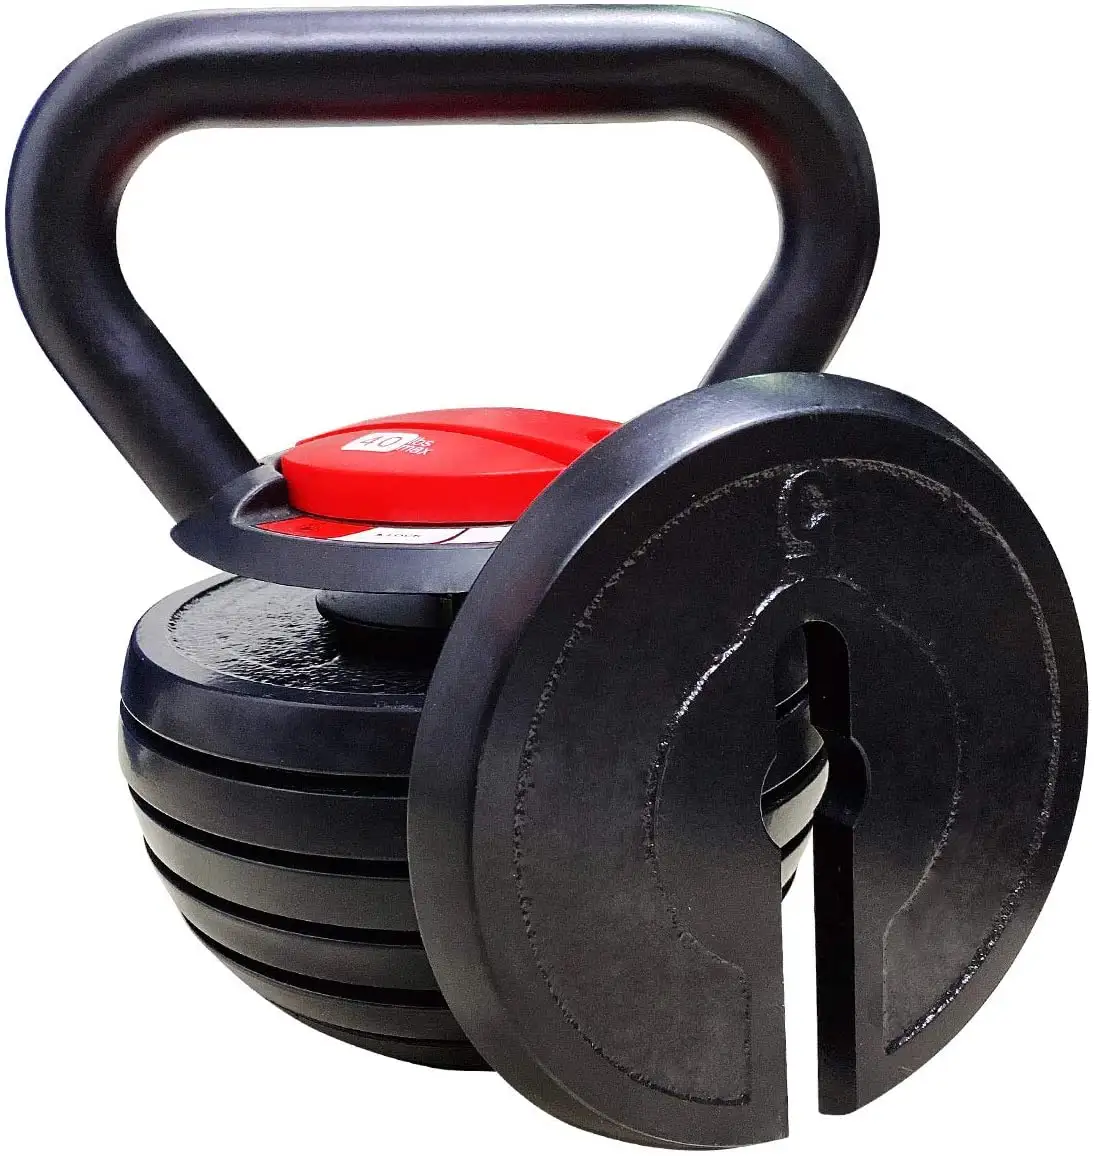 China Factory Direct Supply Wholesale Custom Color Gym Fitness Equipment 6 In 1 Adjustable Kettlebell Barbell Bar 9kg